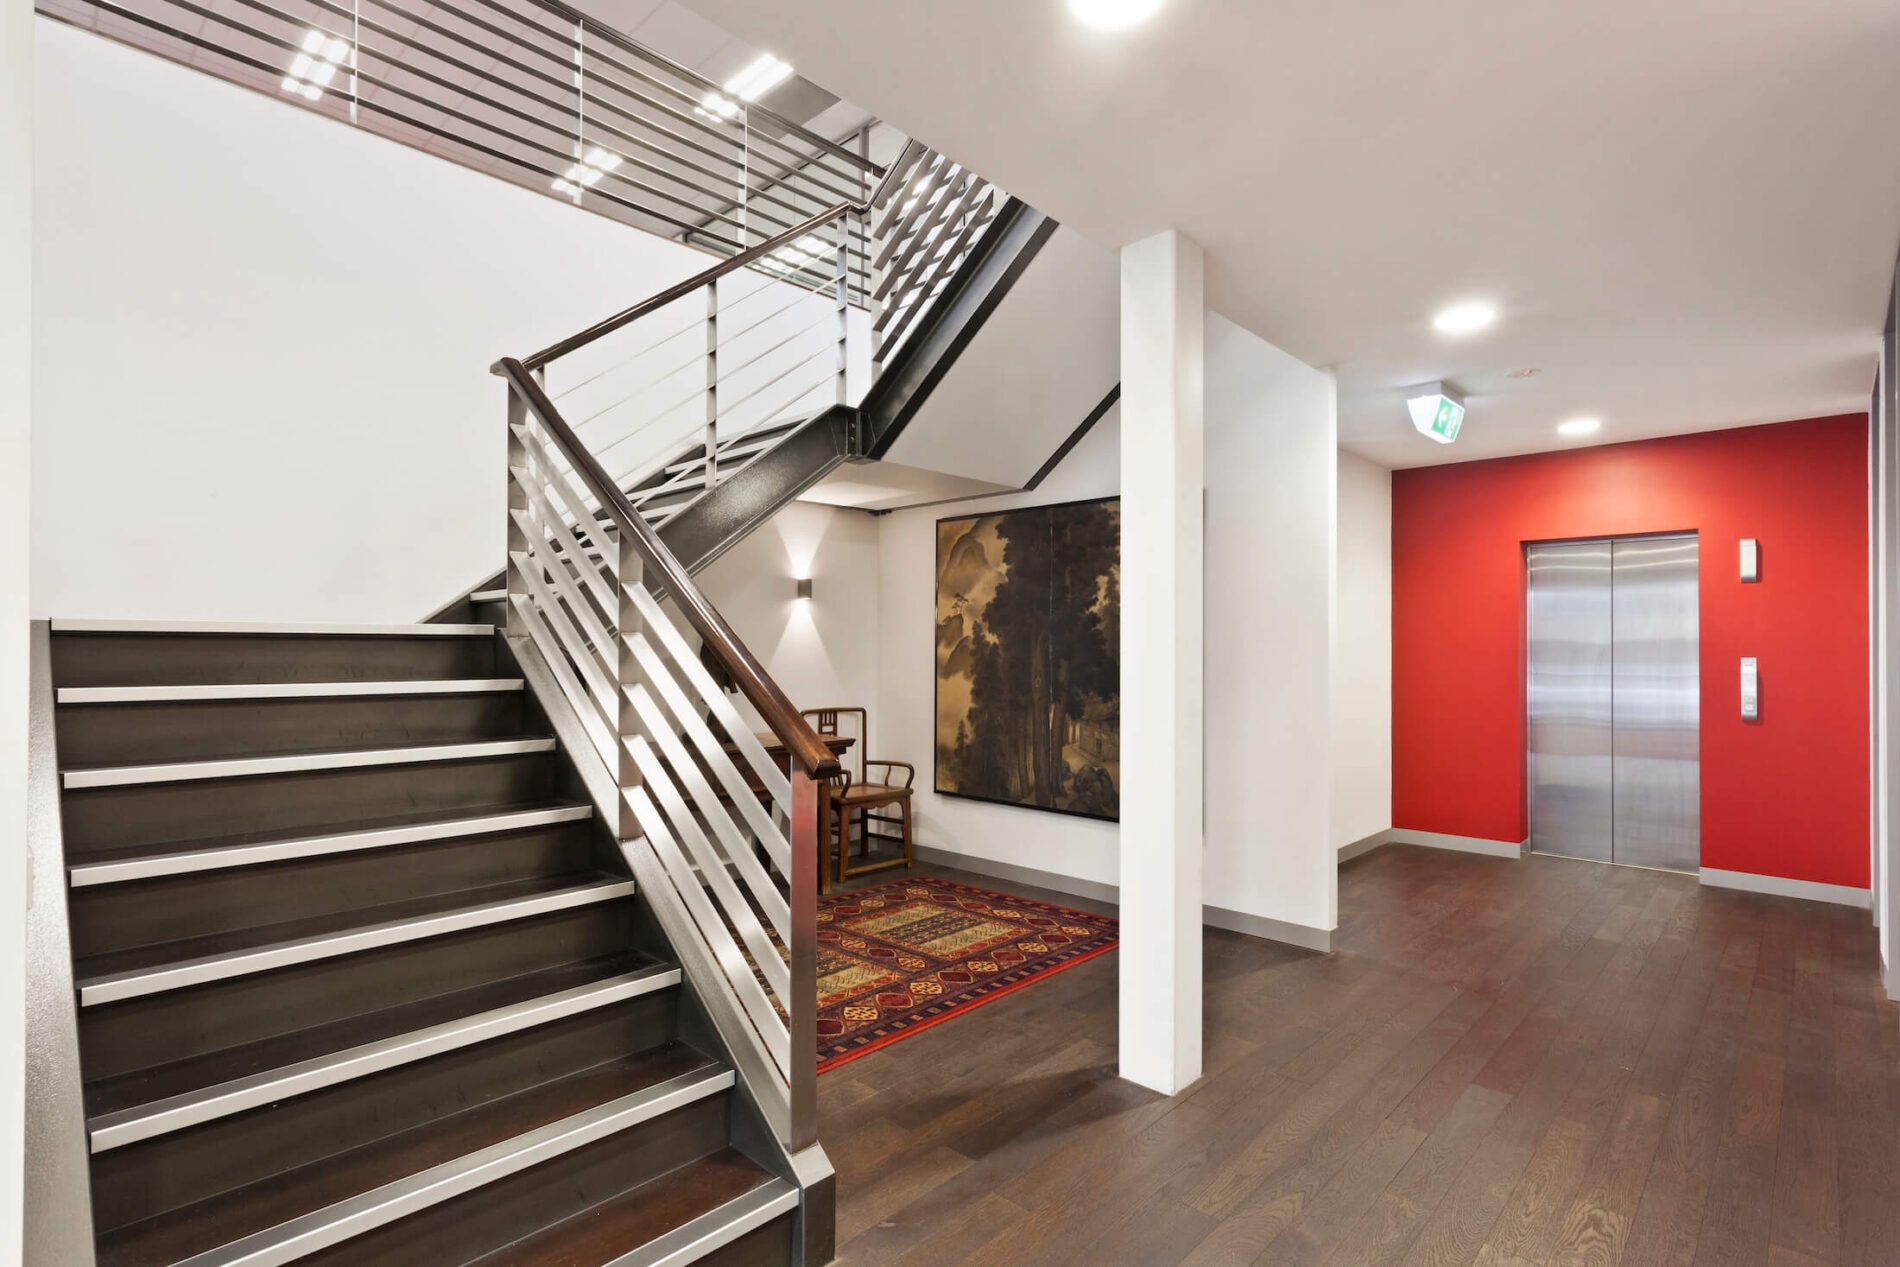 Stairs leading from foyer with timber look flooring, rug-covered stairwell and lift with red feature wall